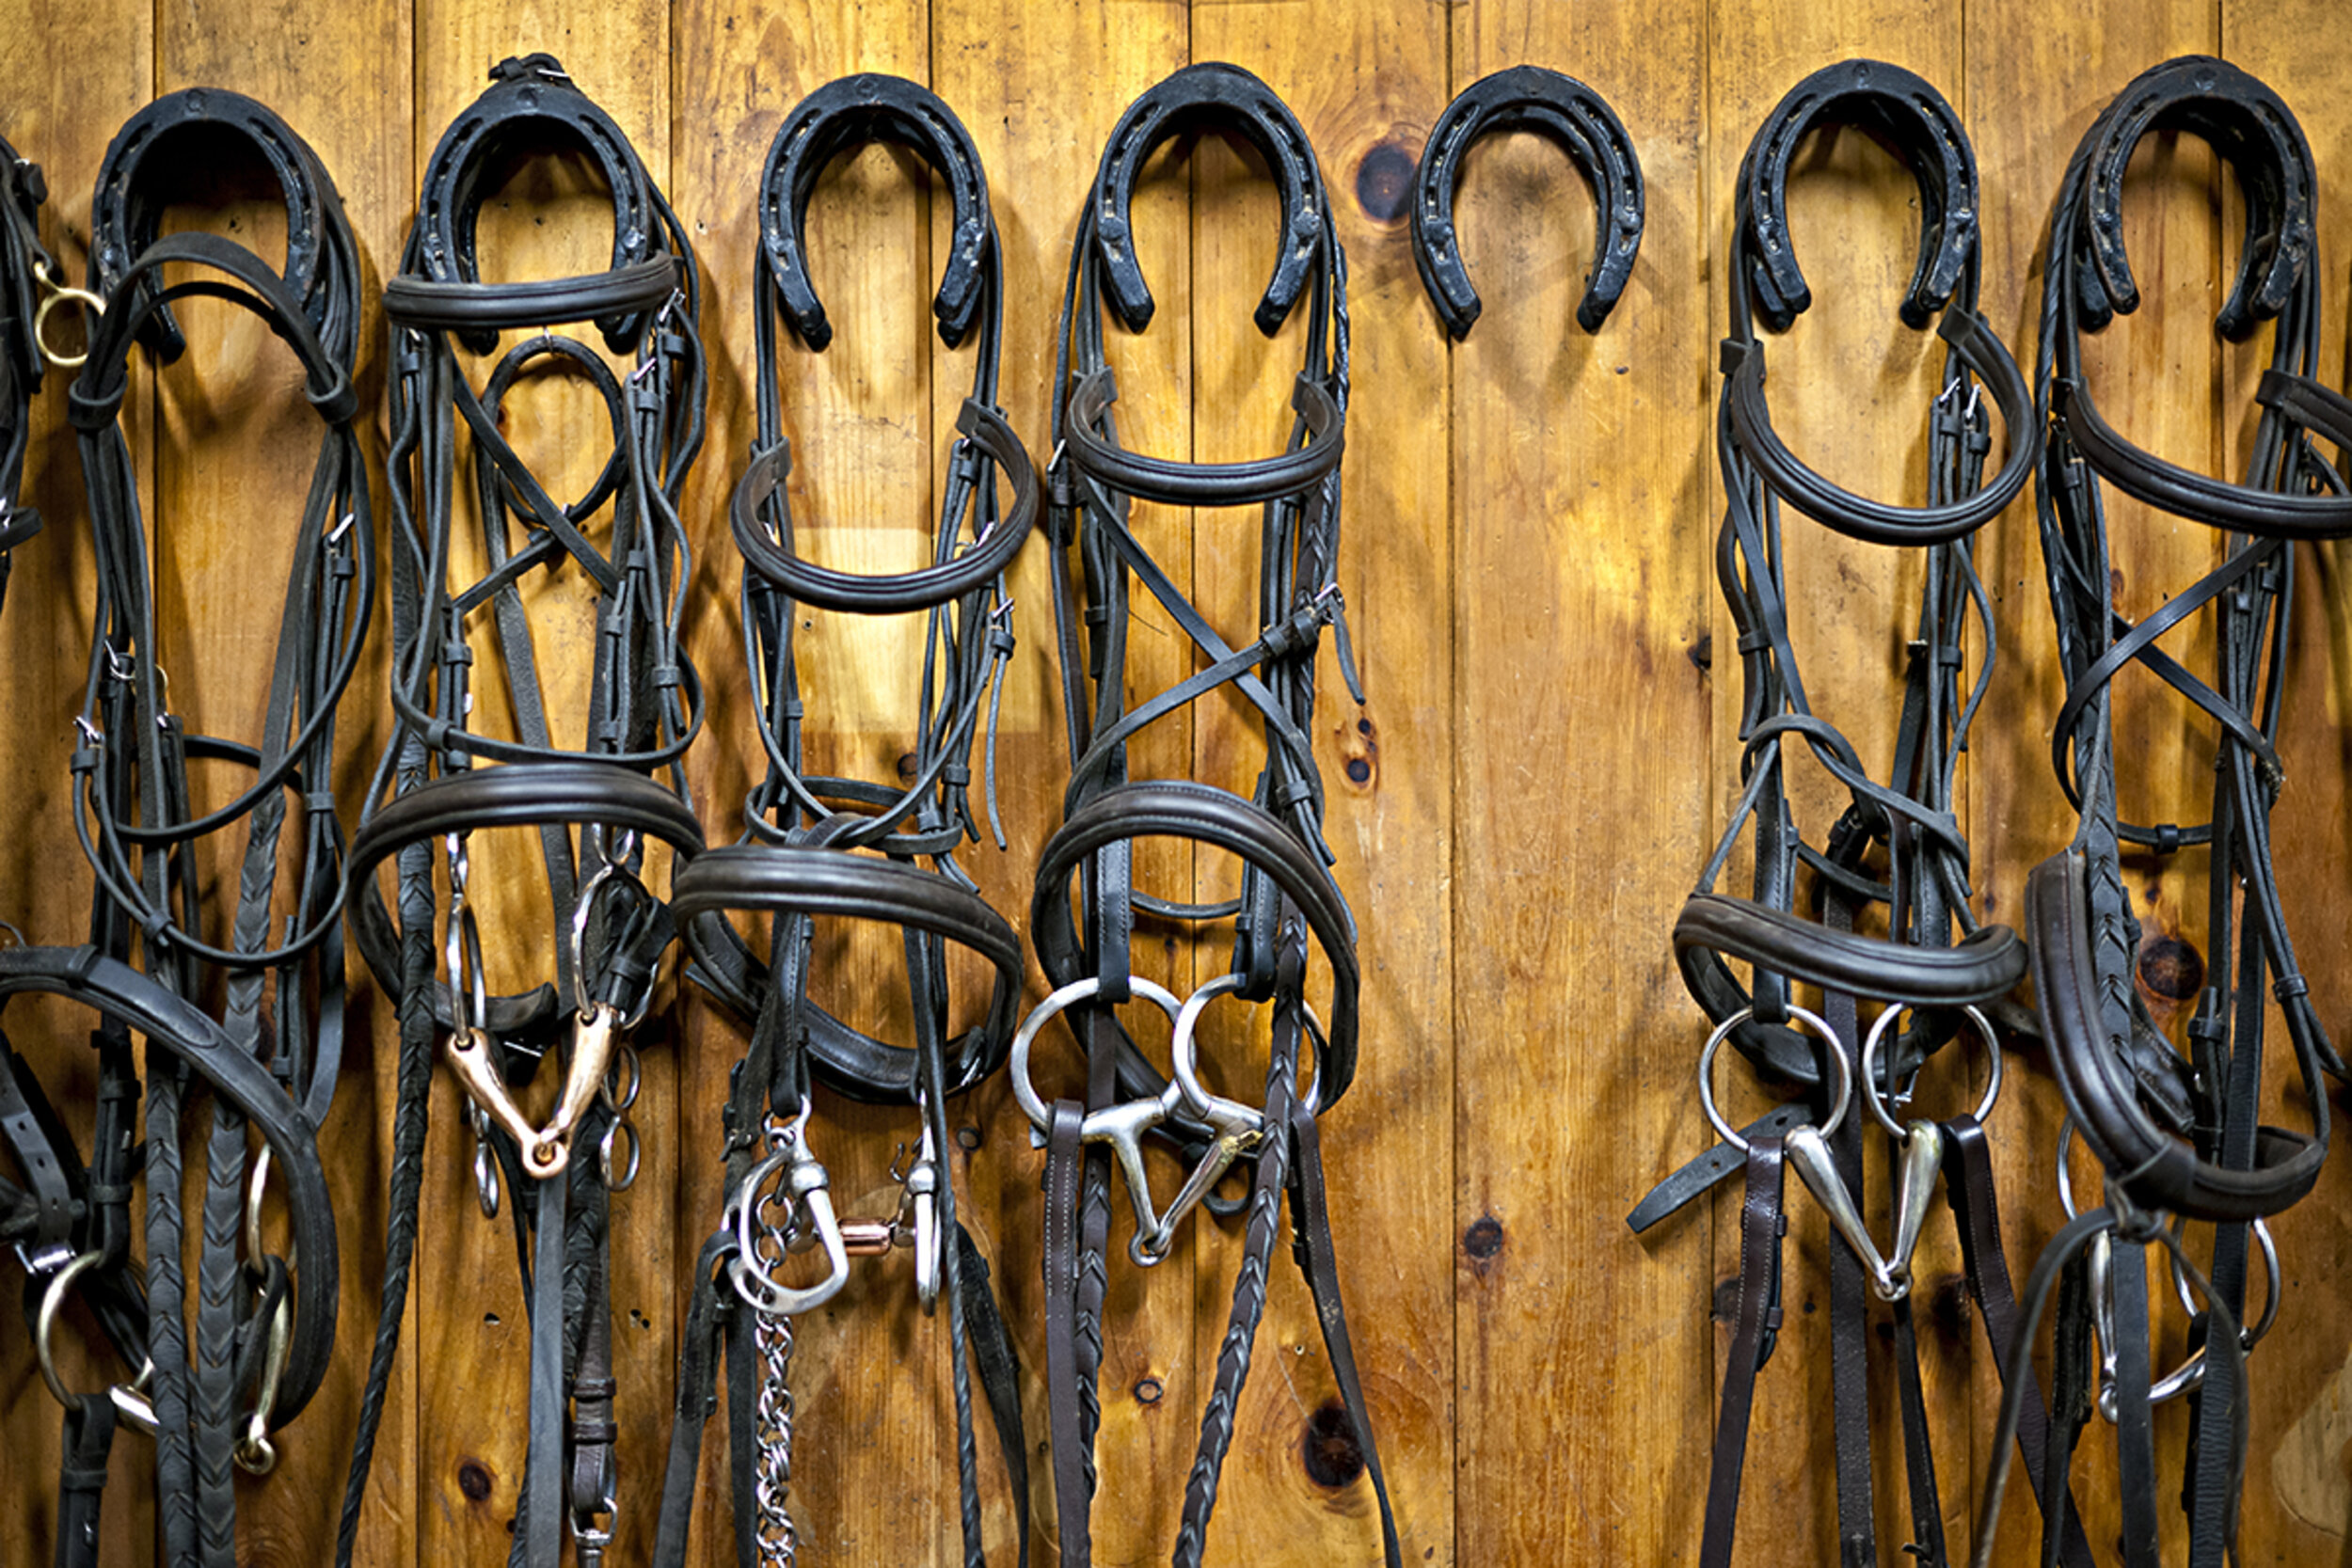 An organised set of bridles on a wall